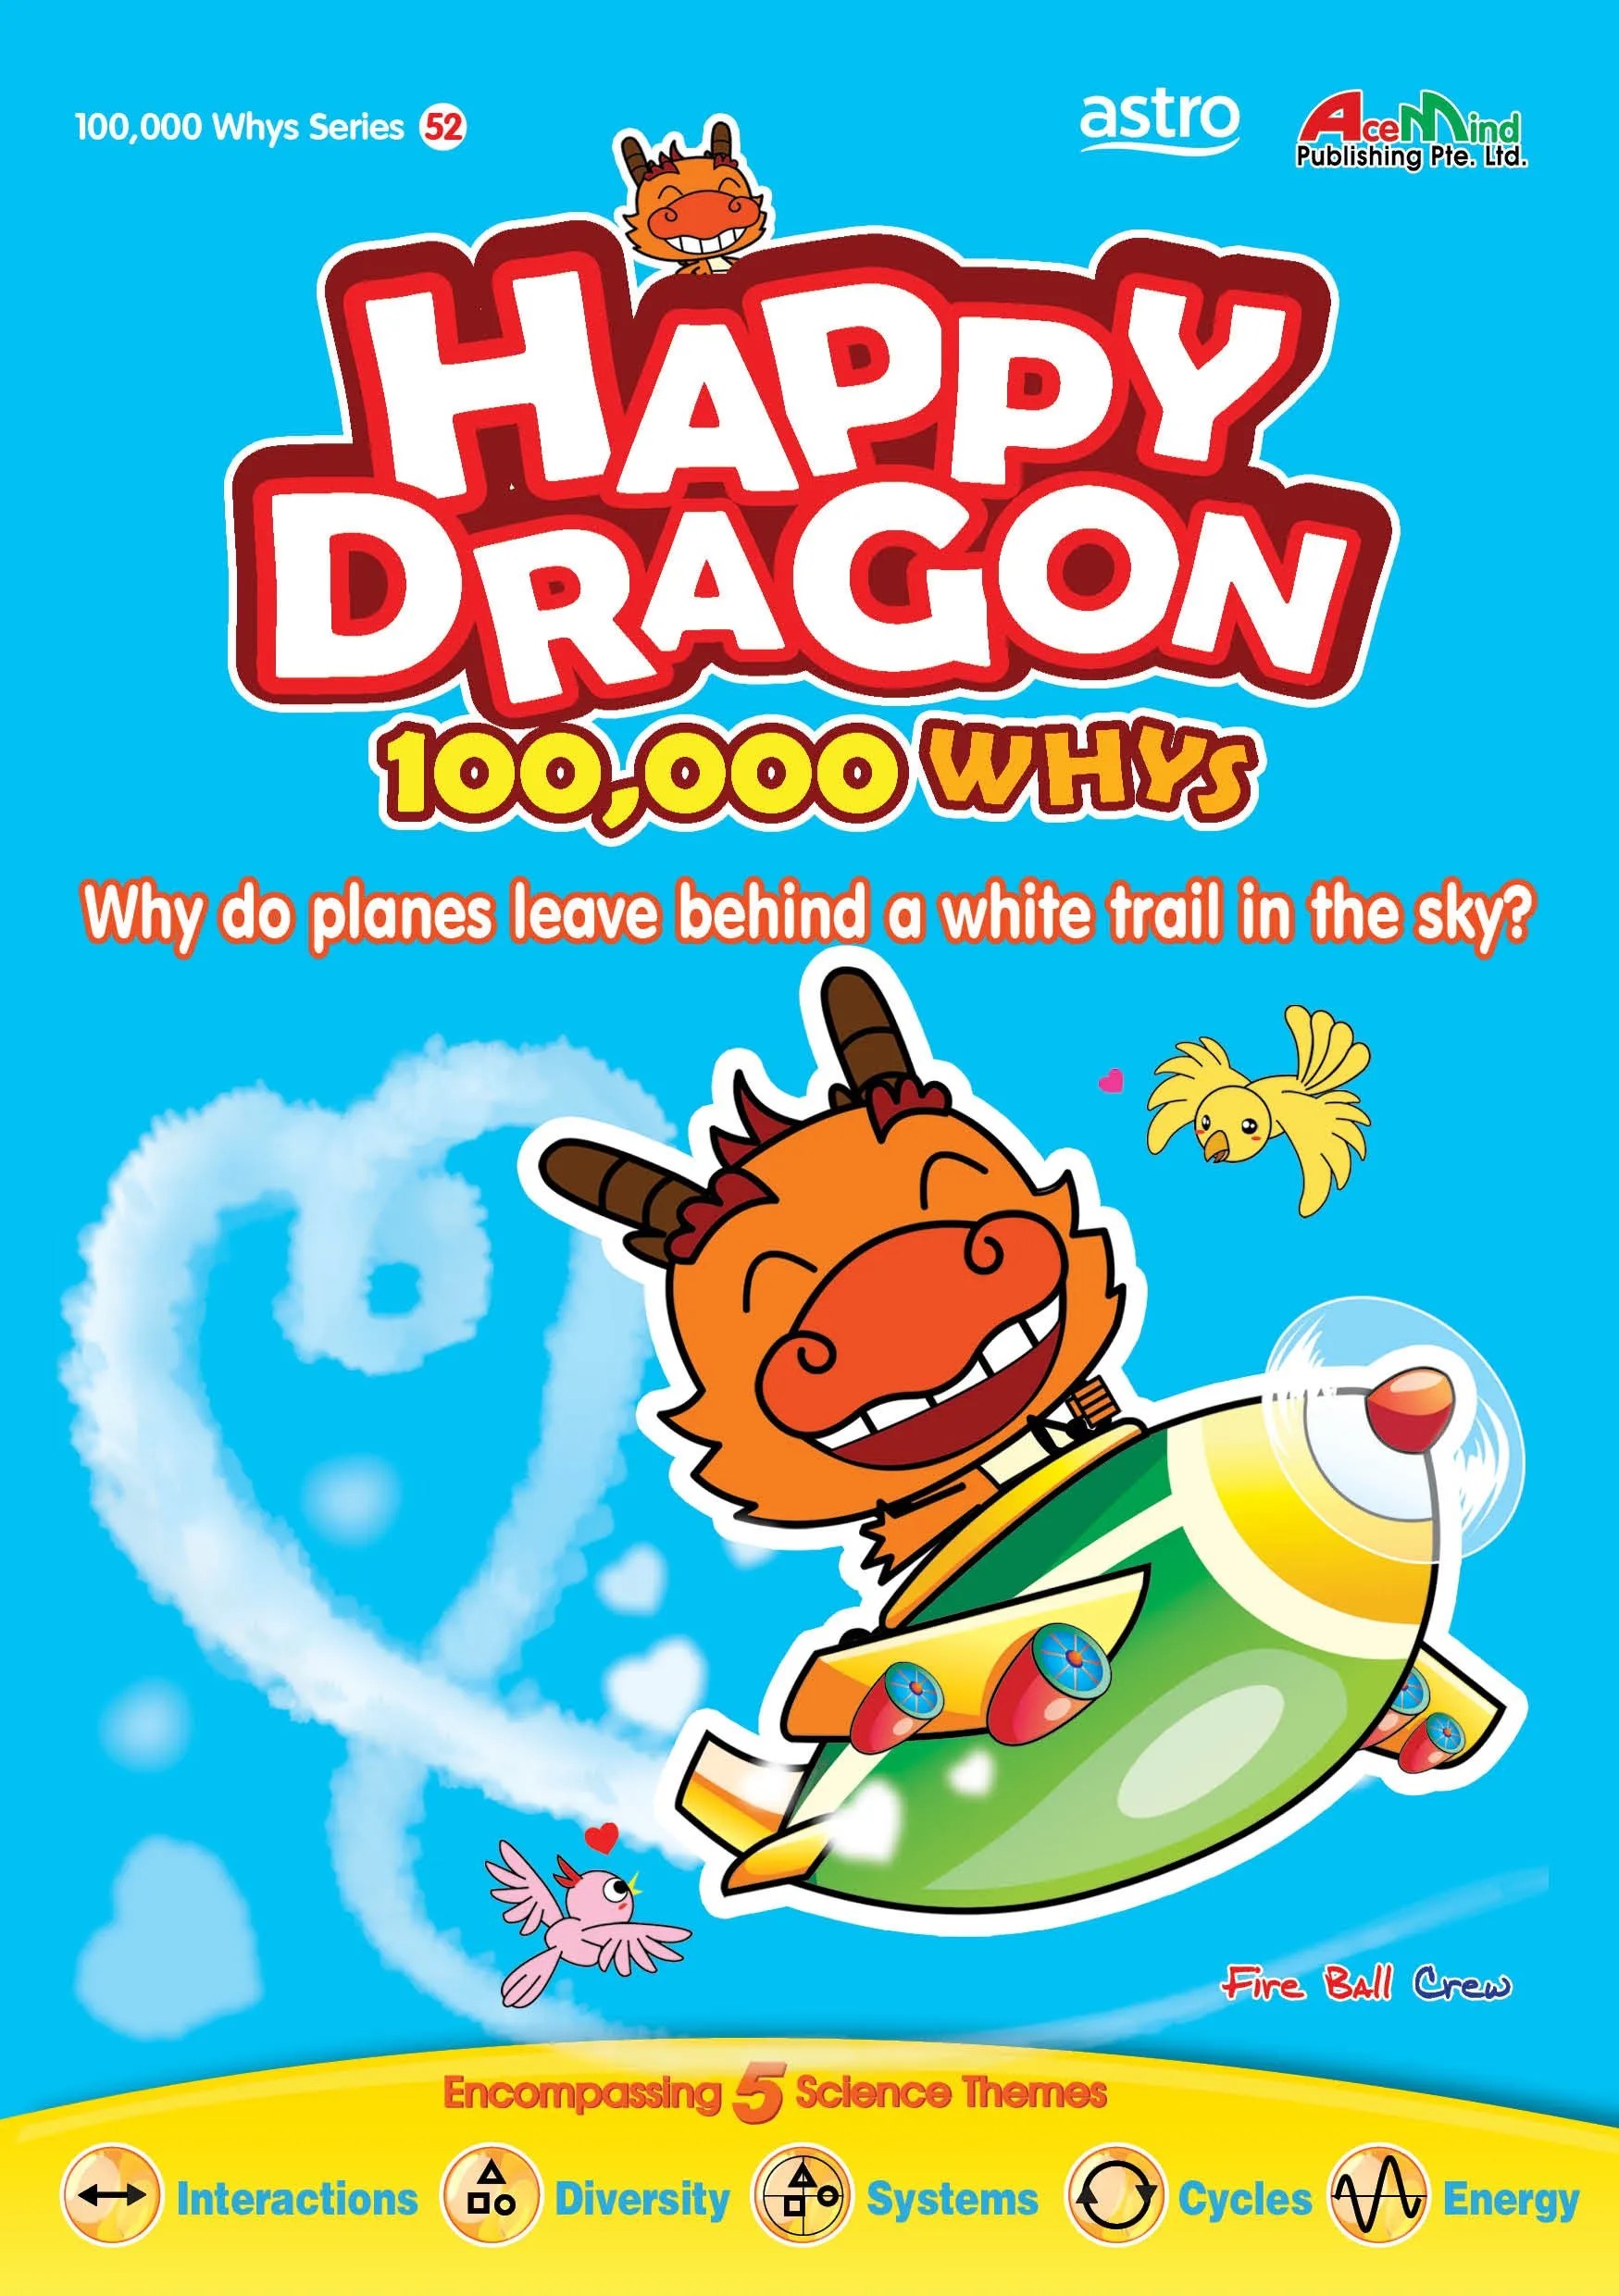 Happy Dragon#52 Why Do Planes Leave
Behind A White Trail In
The Sky?